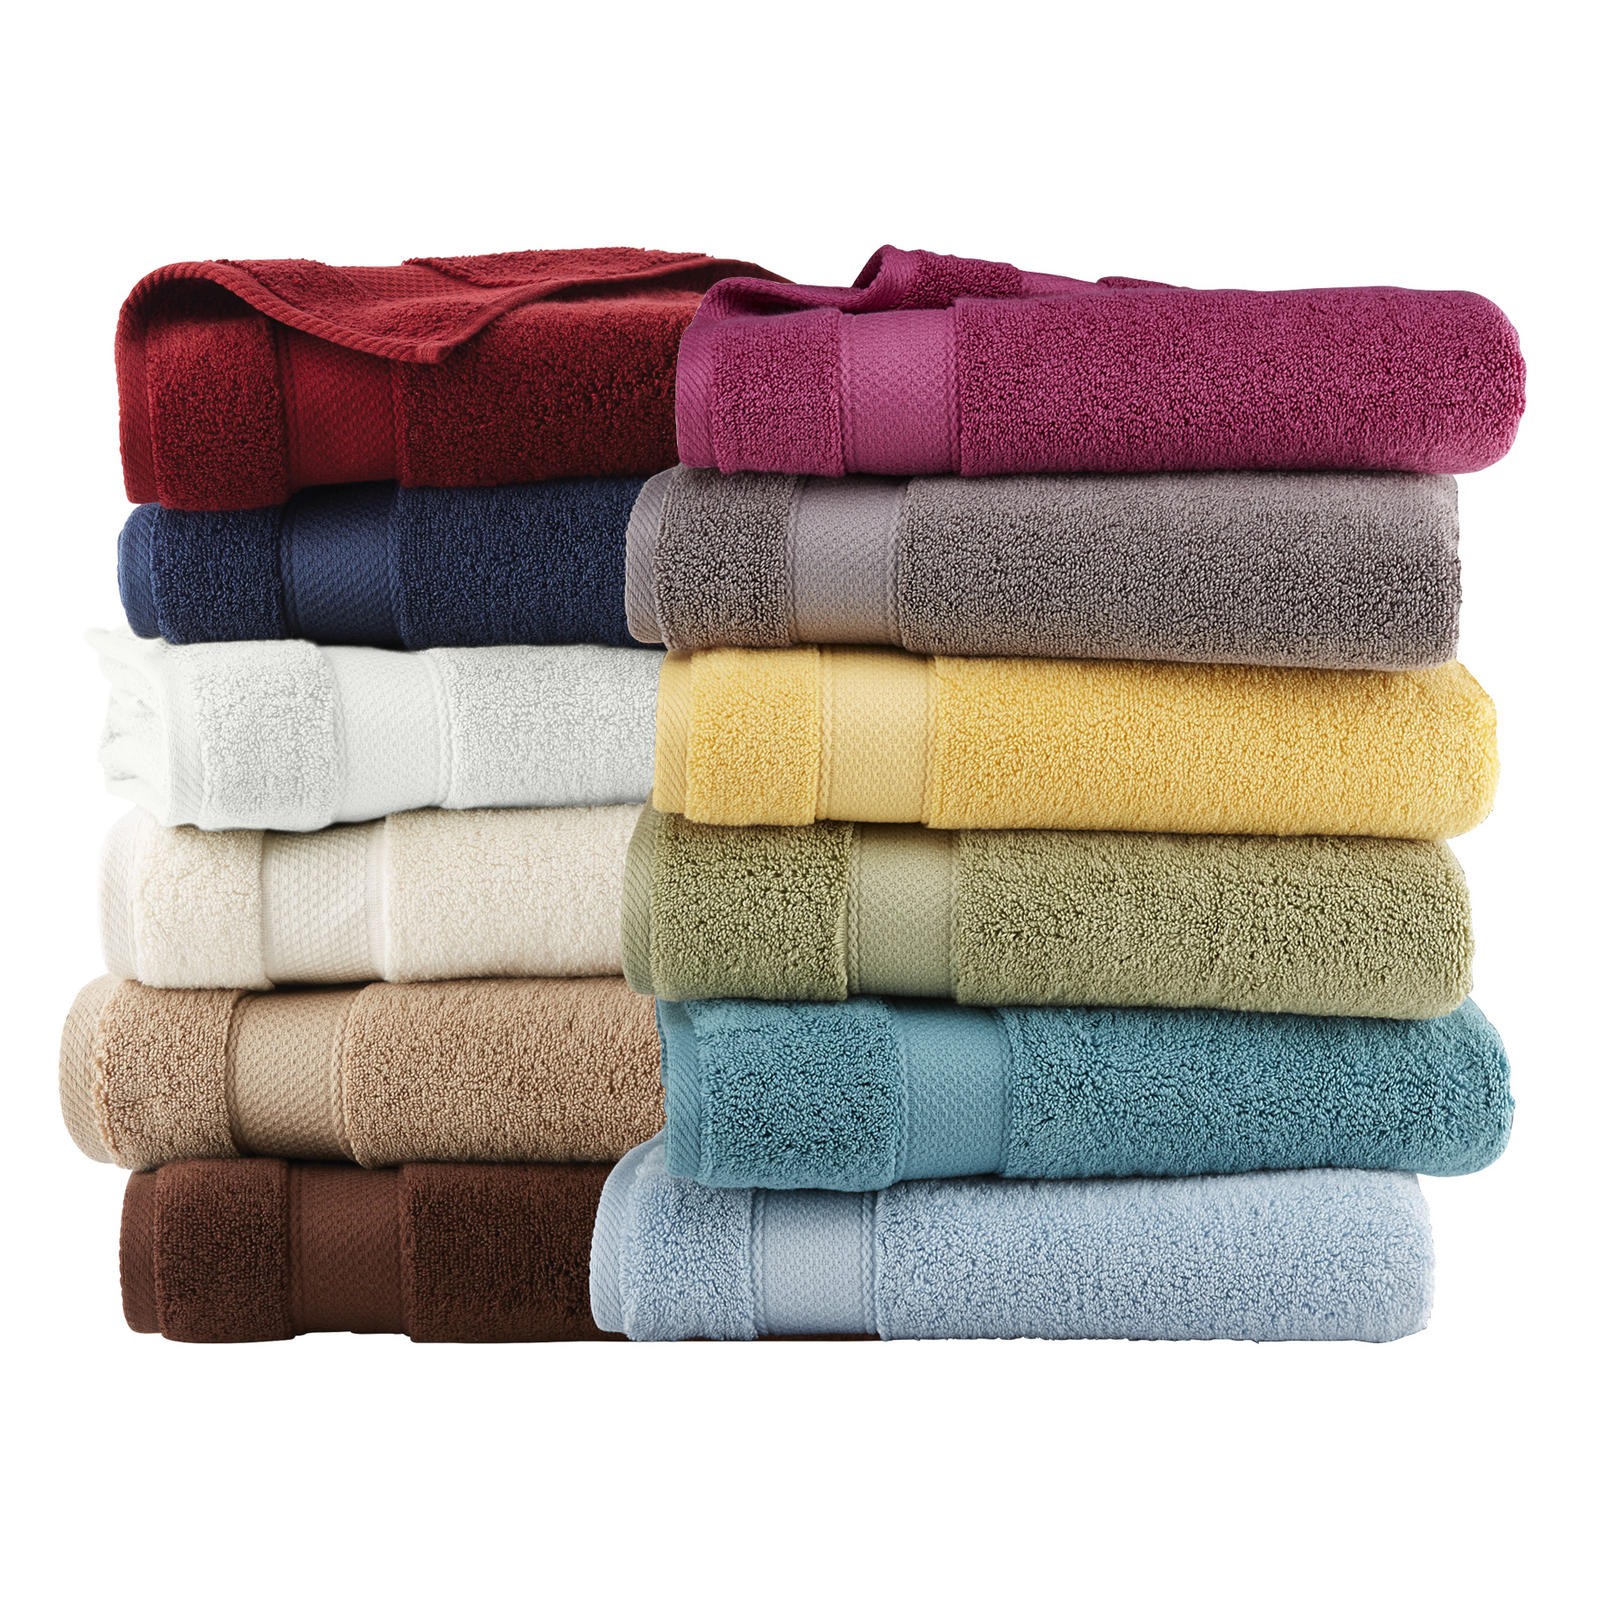 Egyptian Cotton Bath Towels  Hand Towels or Washcloths